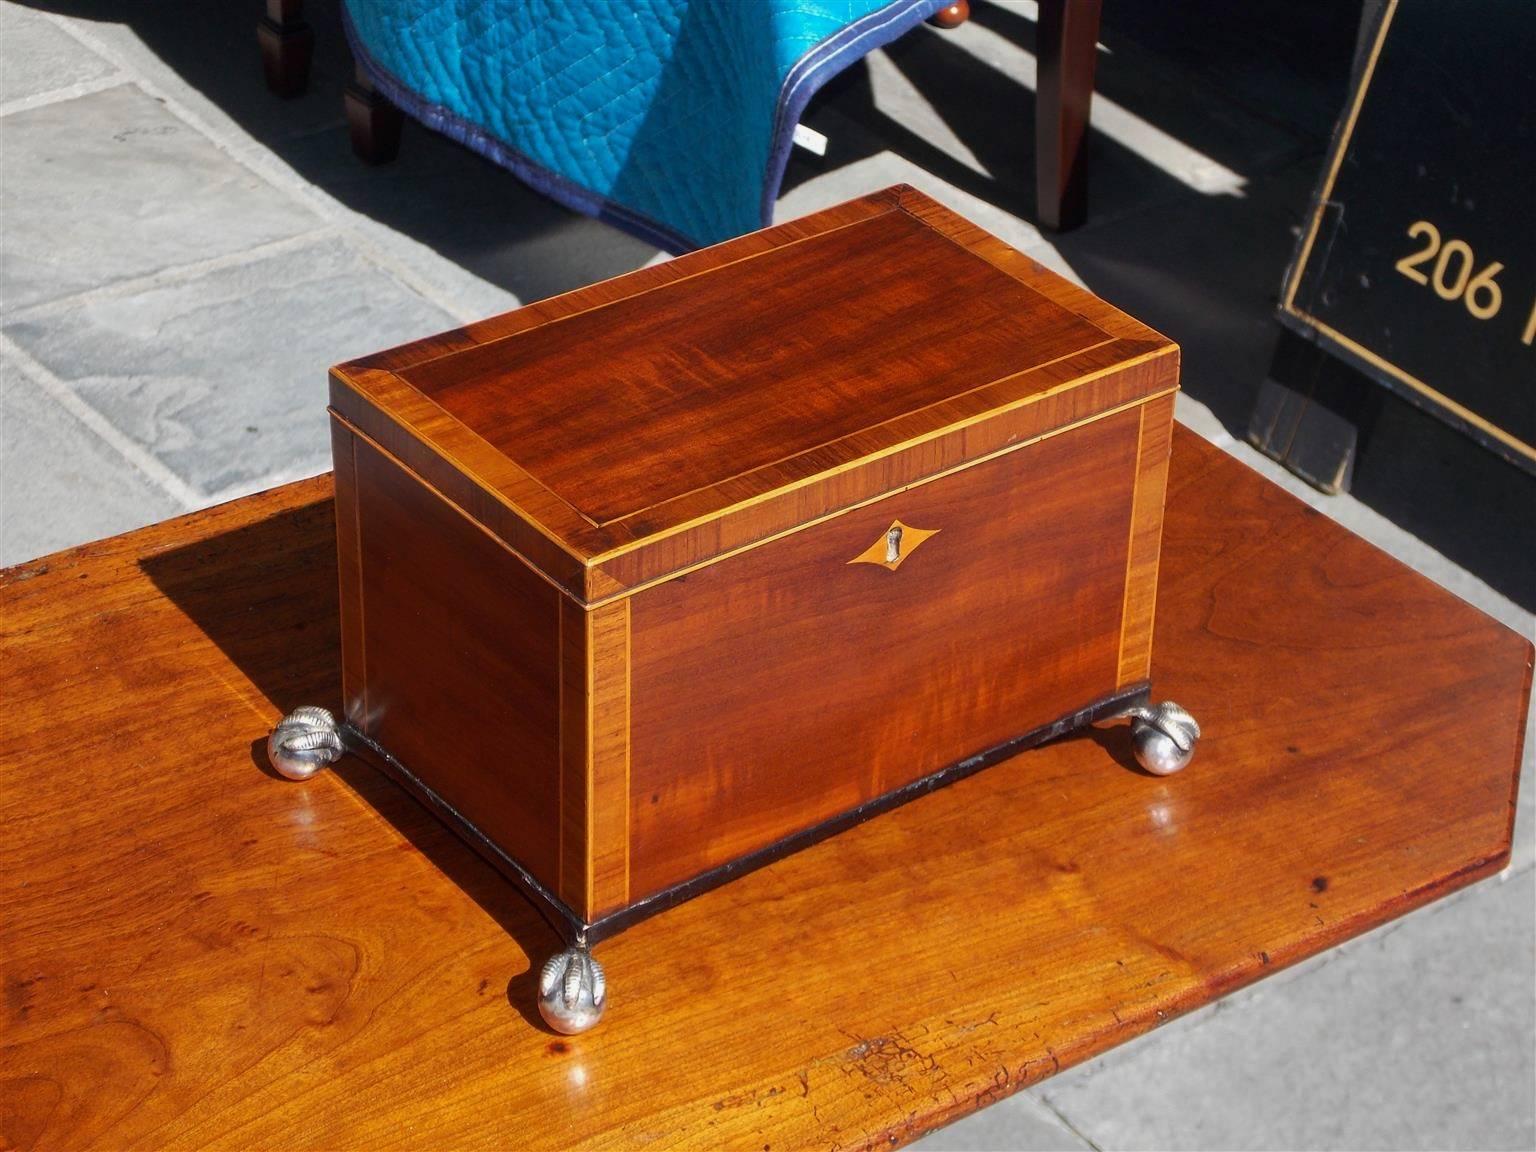 English Regency mahogany tea caddy cross banded in tulip wood with satinwood string inlays, centered diamond escutcheon, hinged lid with compartmentalized lined interior, and terminating on ebonized molded base with silver over brass ball and claw